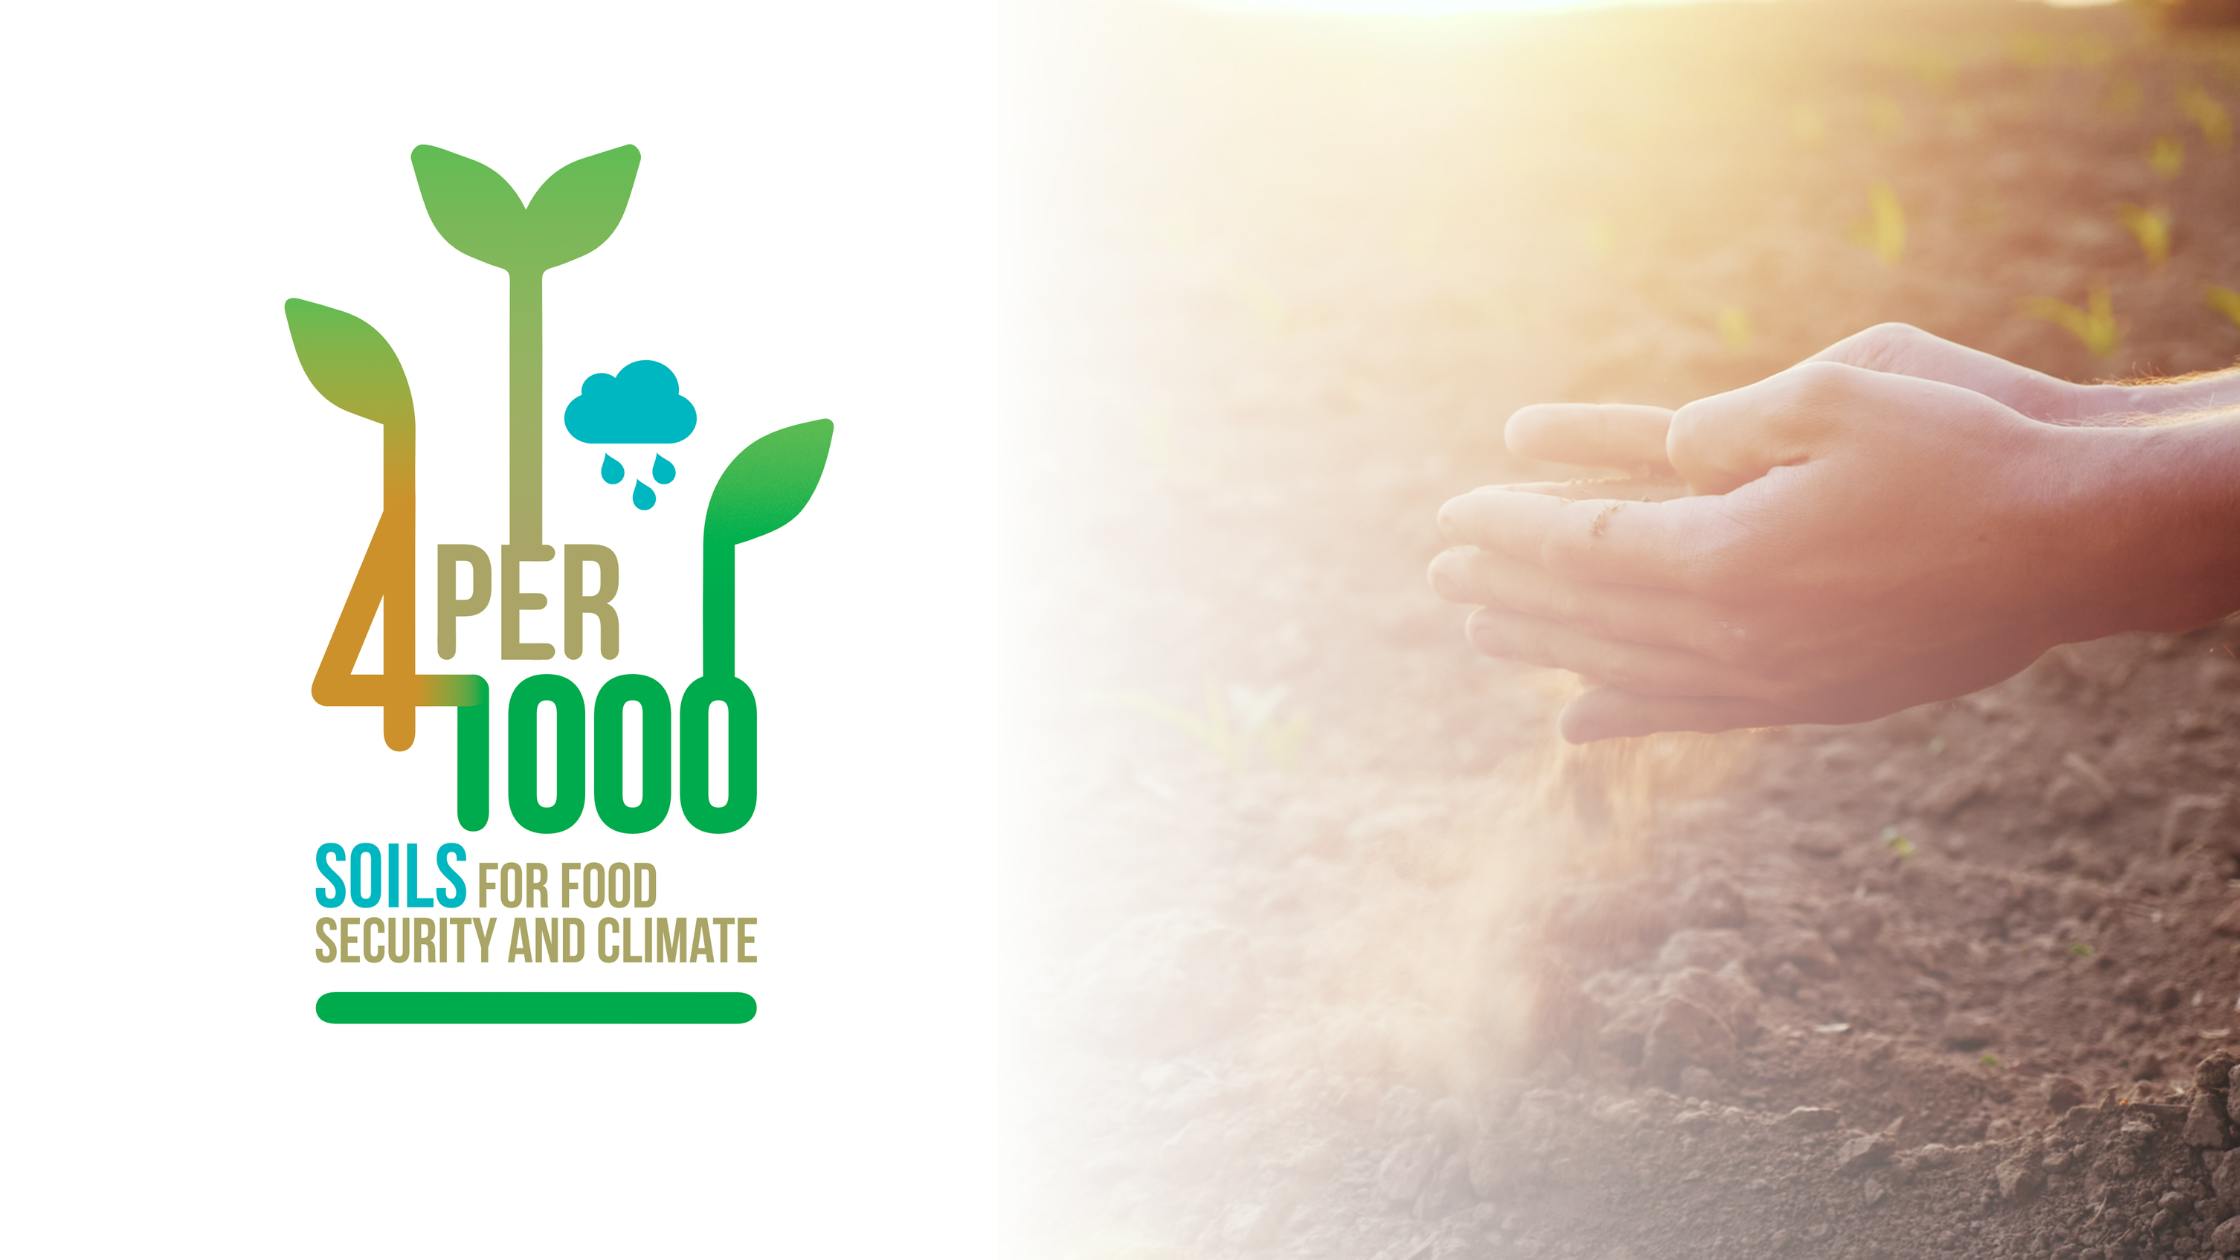 4 Per 1000 initiative logo against a white background with an image of farmer's hands in soil